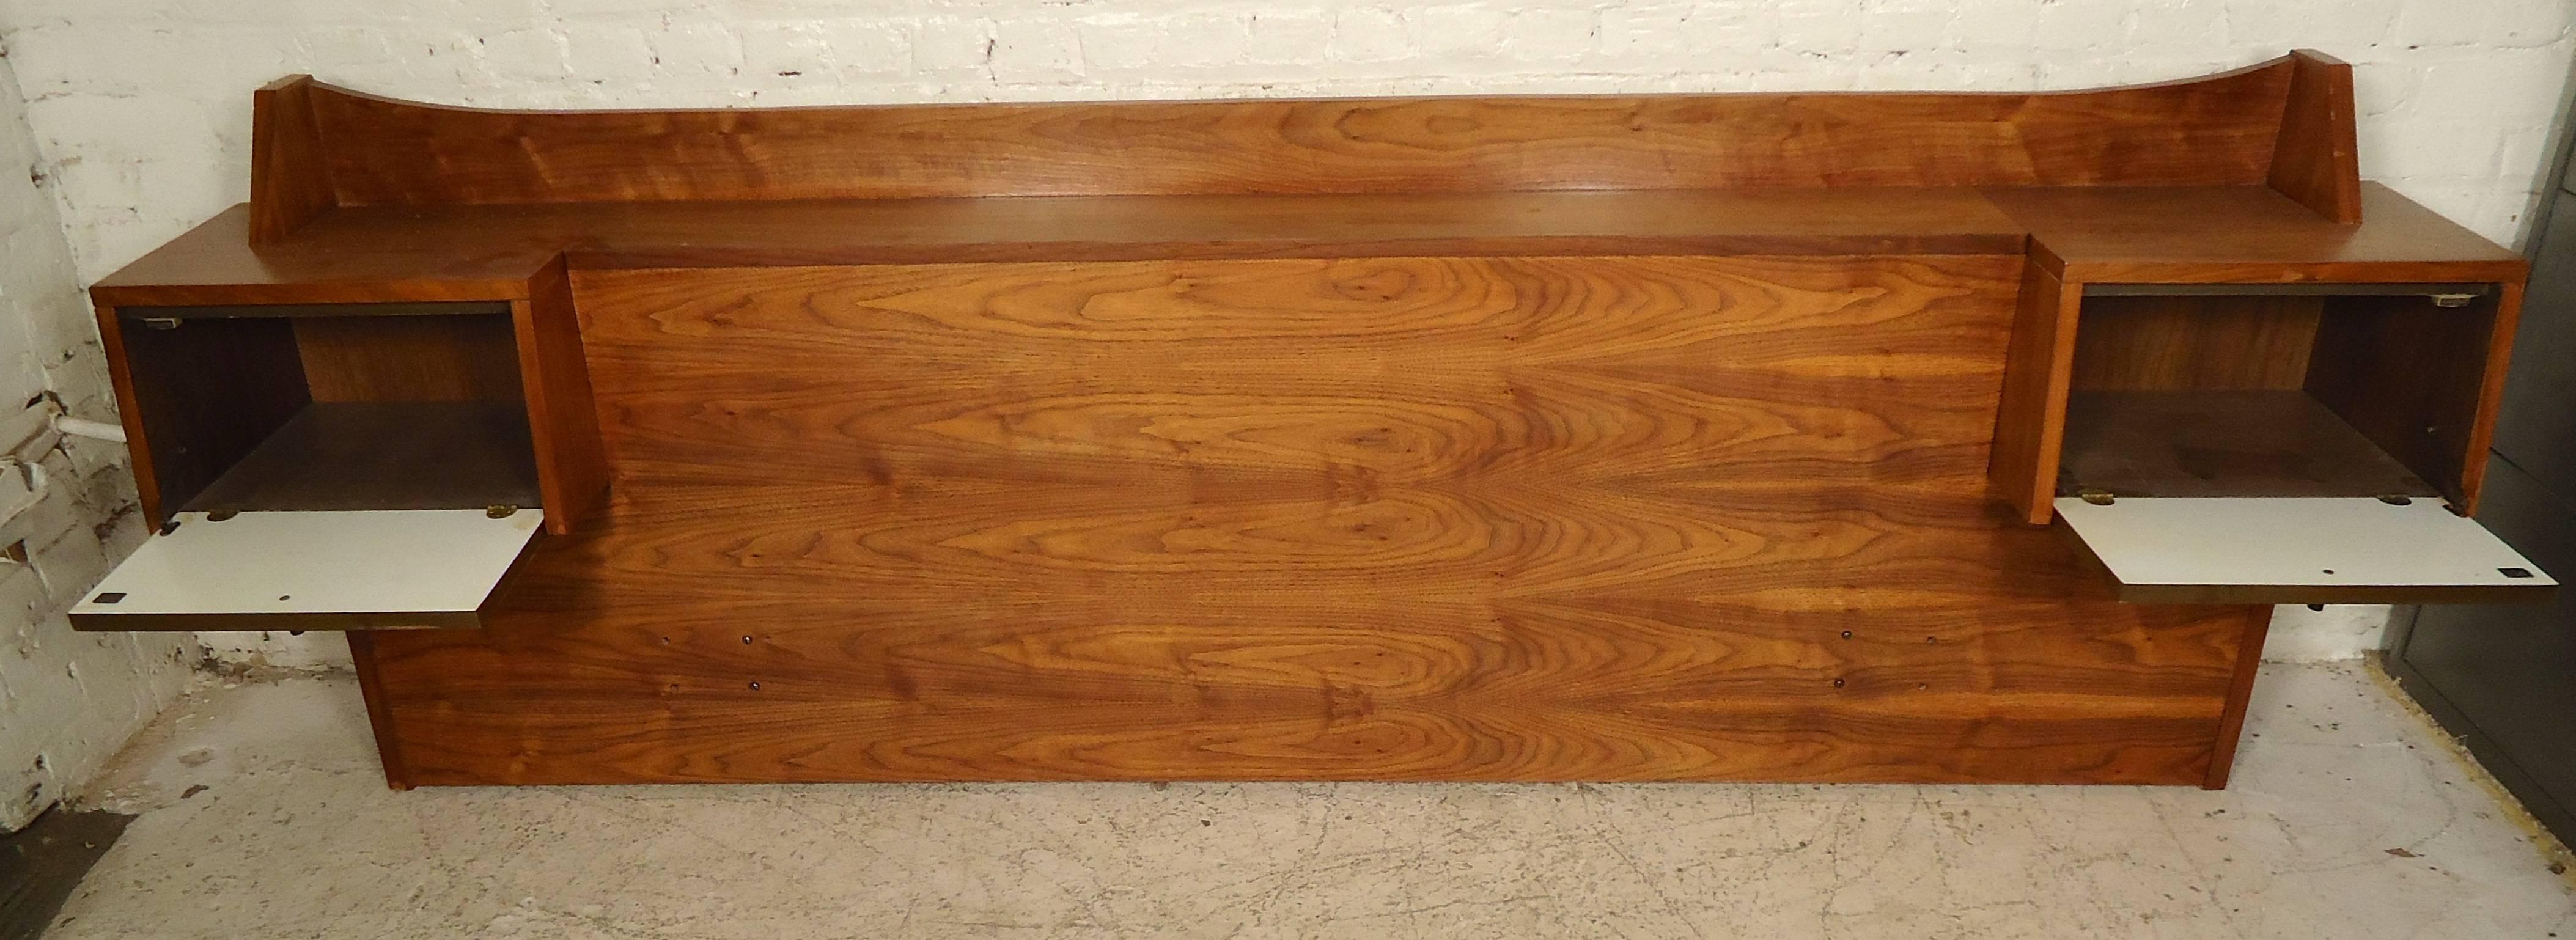 This vintage-modern headboard is uniquely wide, features two side compartments for storage, back shelf and can fit a queen size mattress. It is made from walnut and has been refinished to expose the flow of its walnut grain waves.
Width between